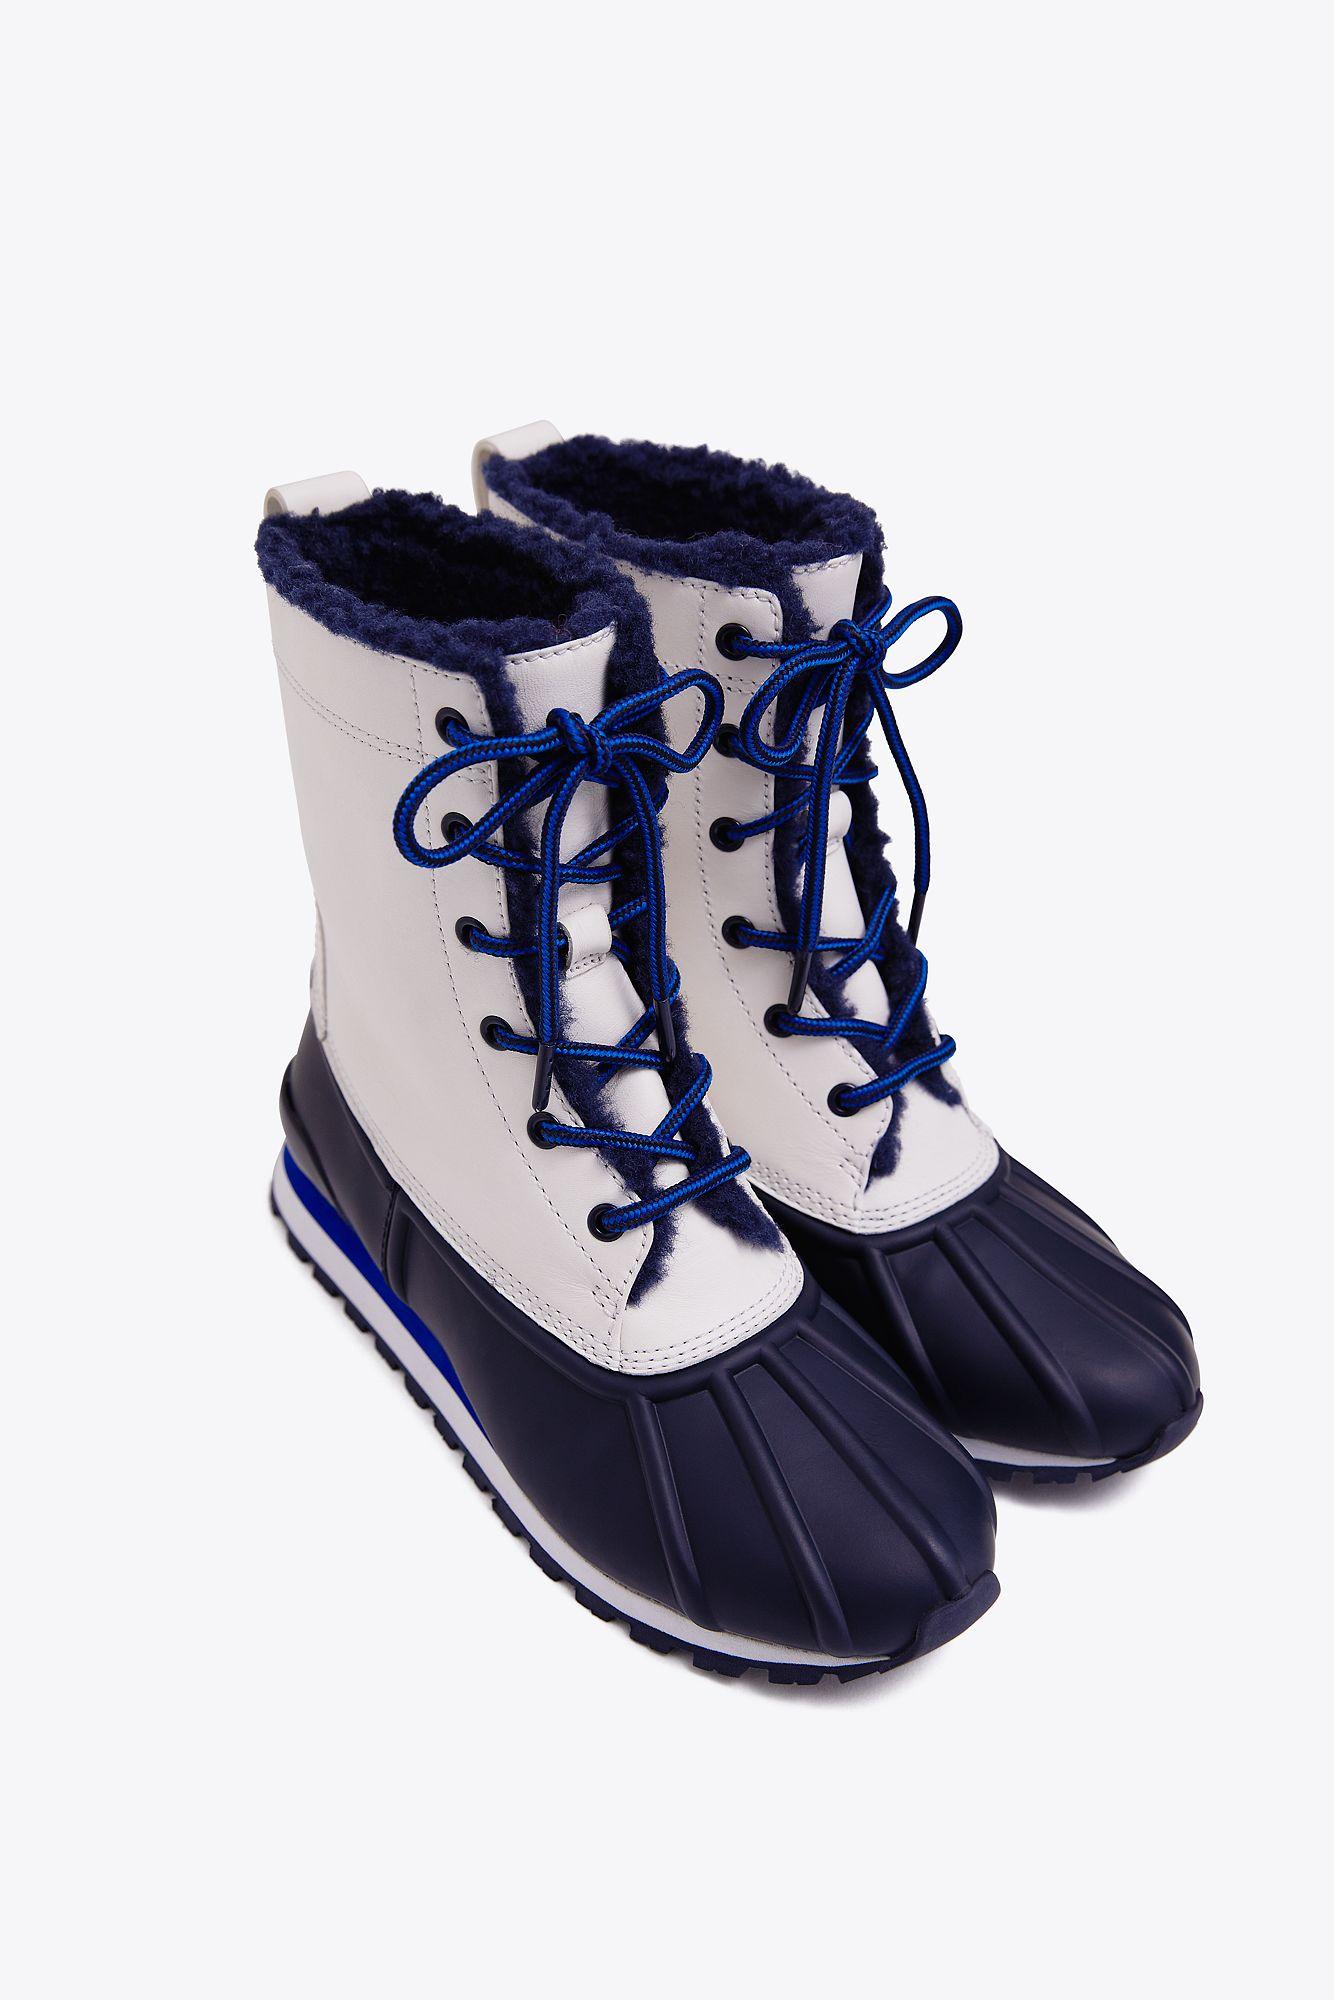 Tory Sport Leather Two-tone Duck Boots in Blue - Lyst